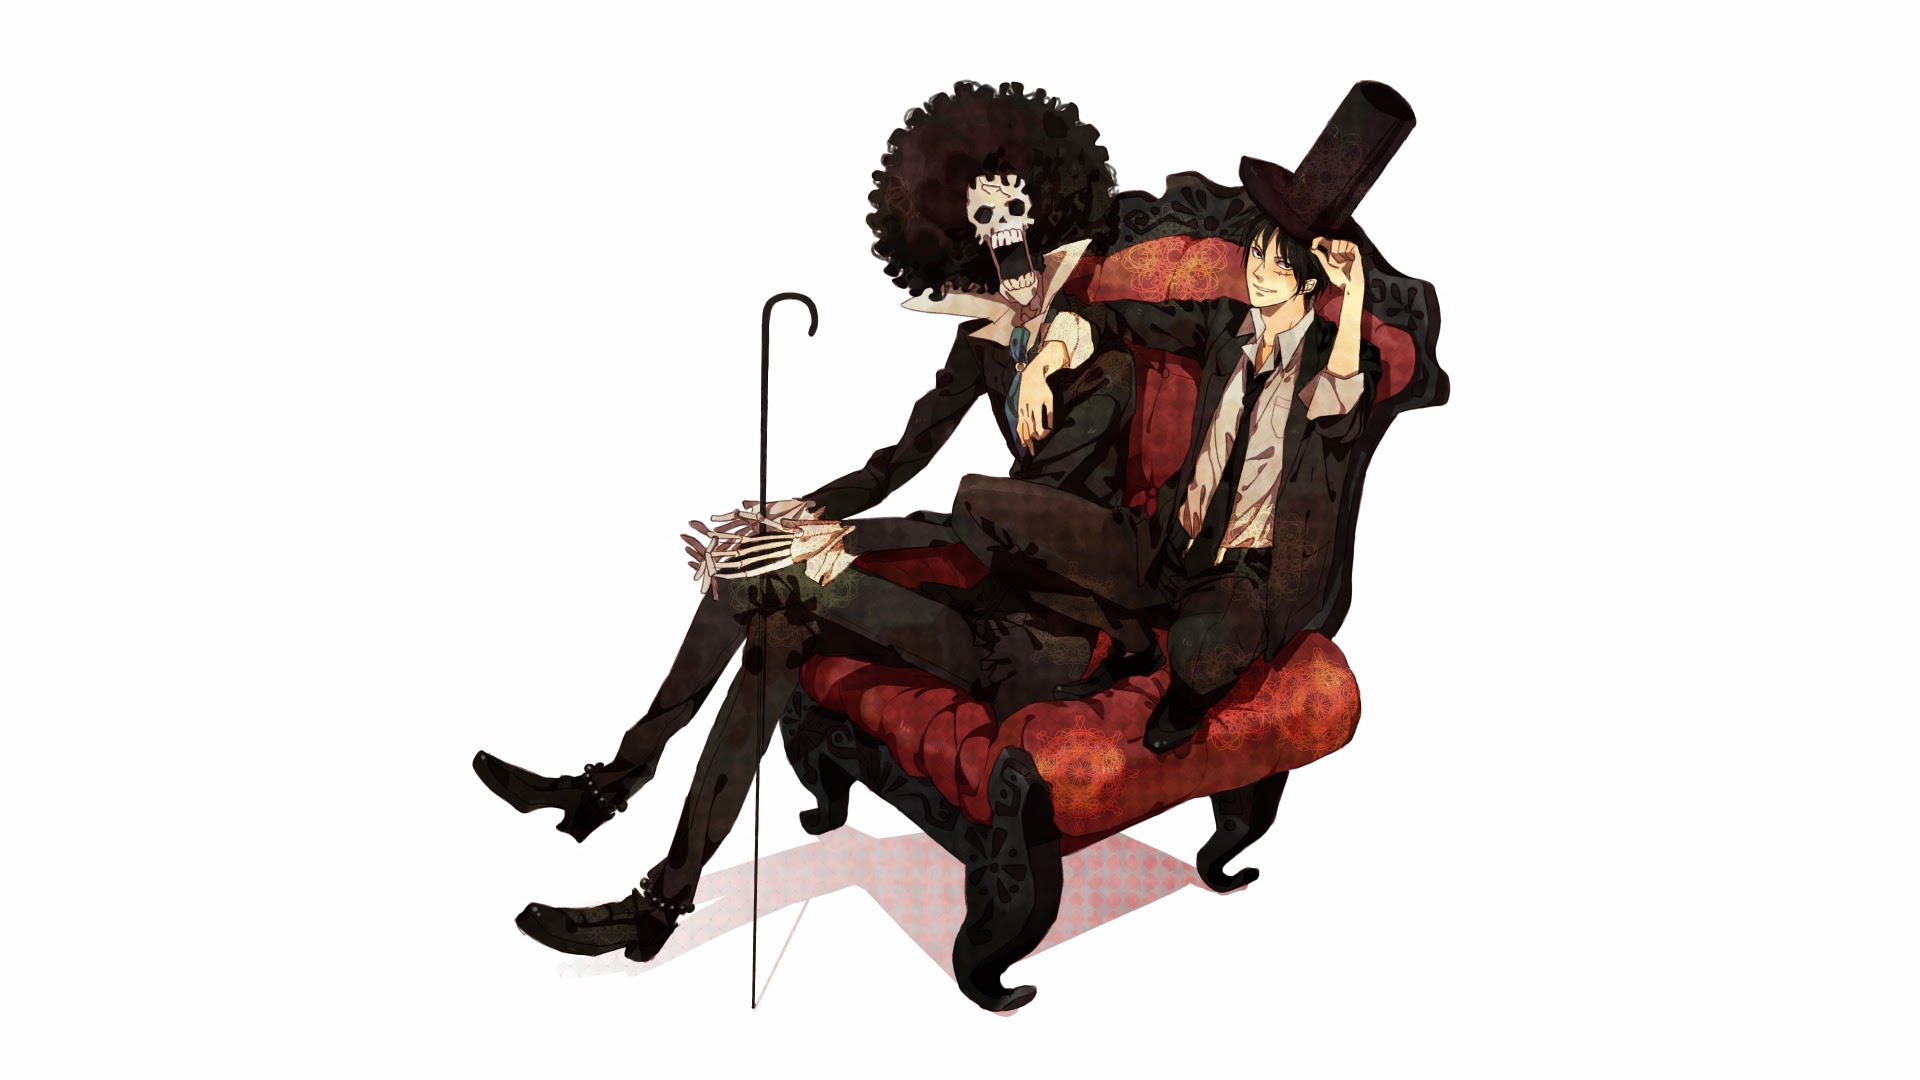 brook and luffy one piece anime hd wallpaper image picture 1920x1080 1920x1080